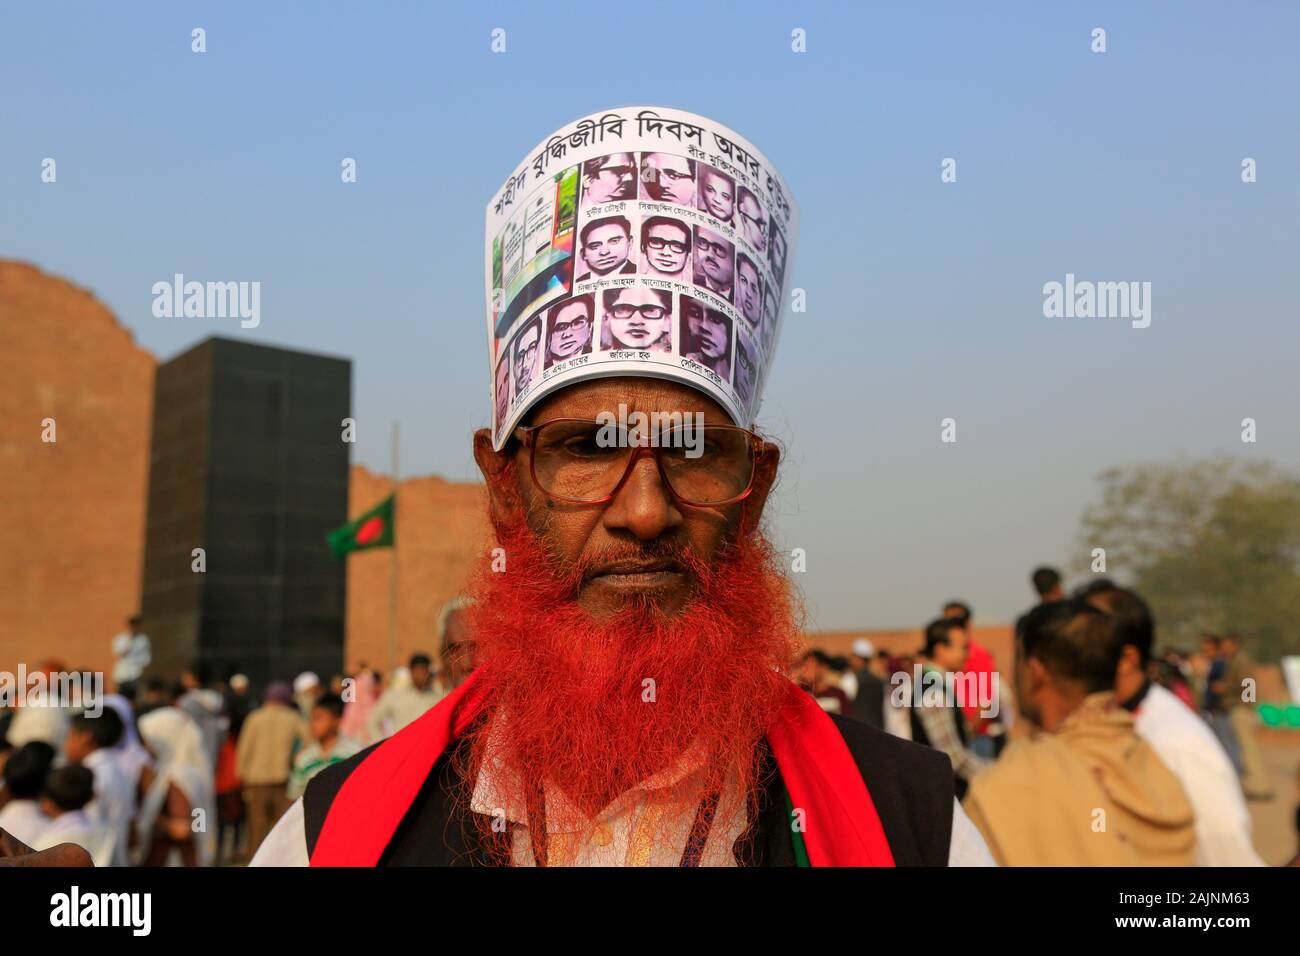 Portrait of a freedom fighter who takes part in the Bangladesh Liberation War in 1971. Dhaka, Bangladesh Stock Photo